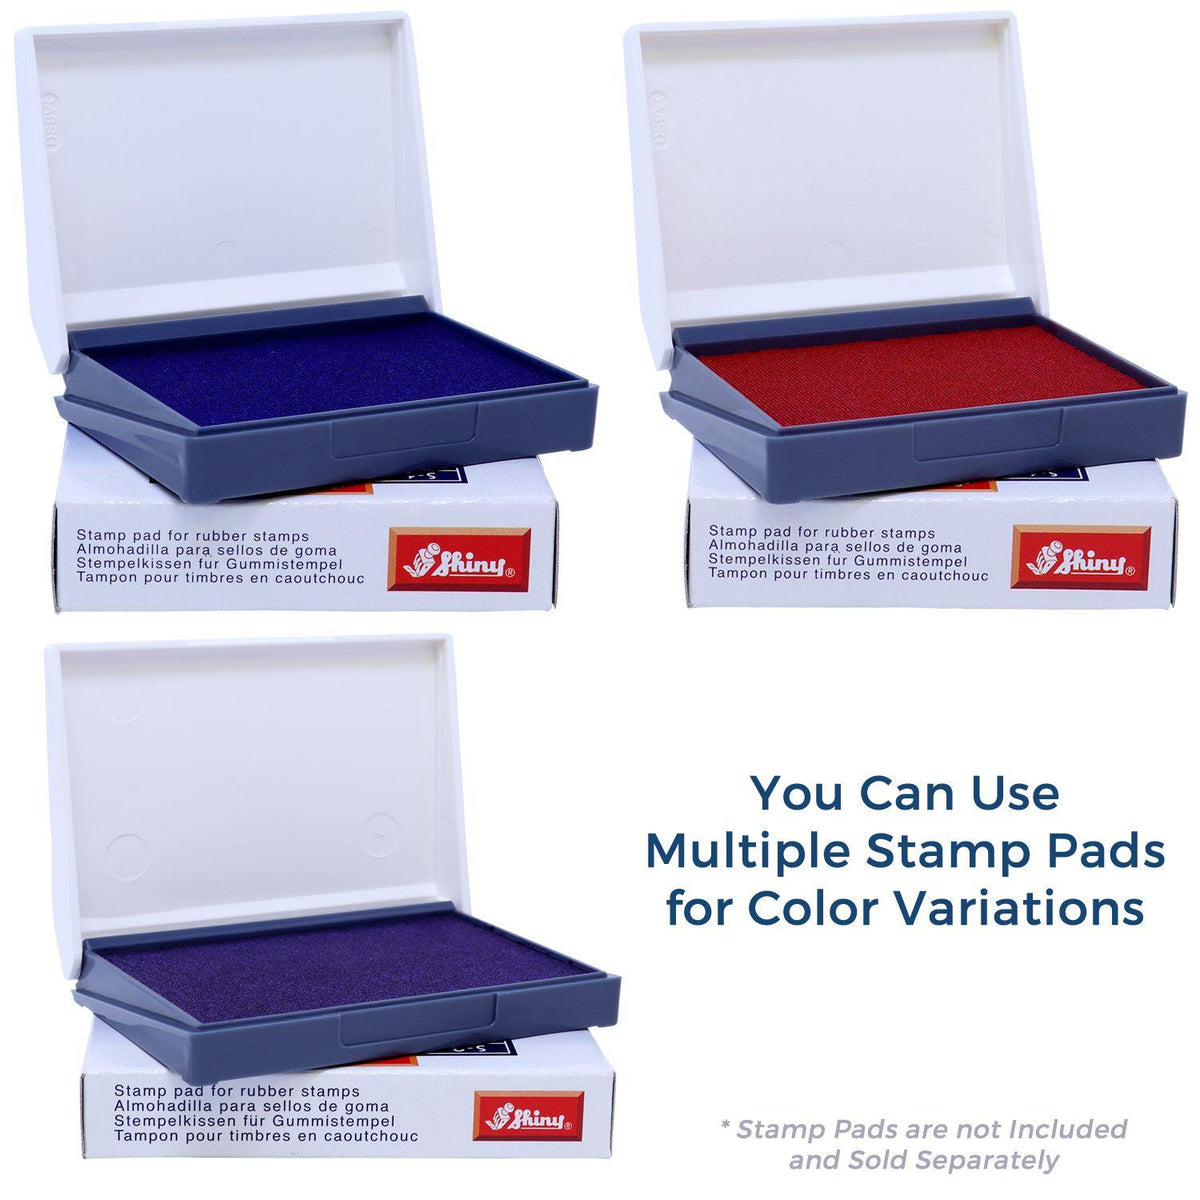 Stamp Pads for Cargado Rubber Stamp Available